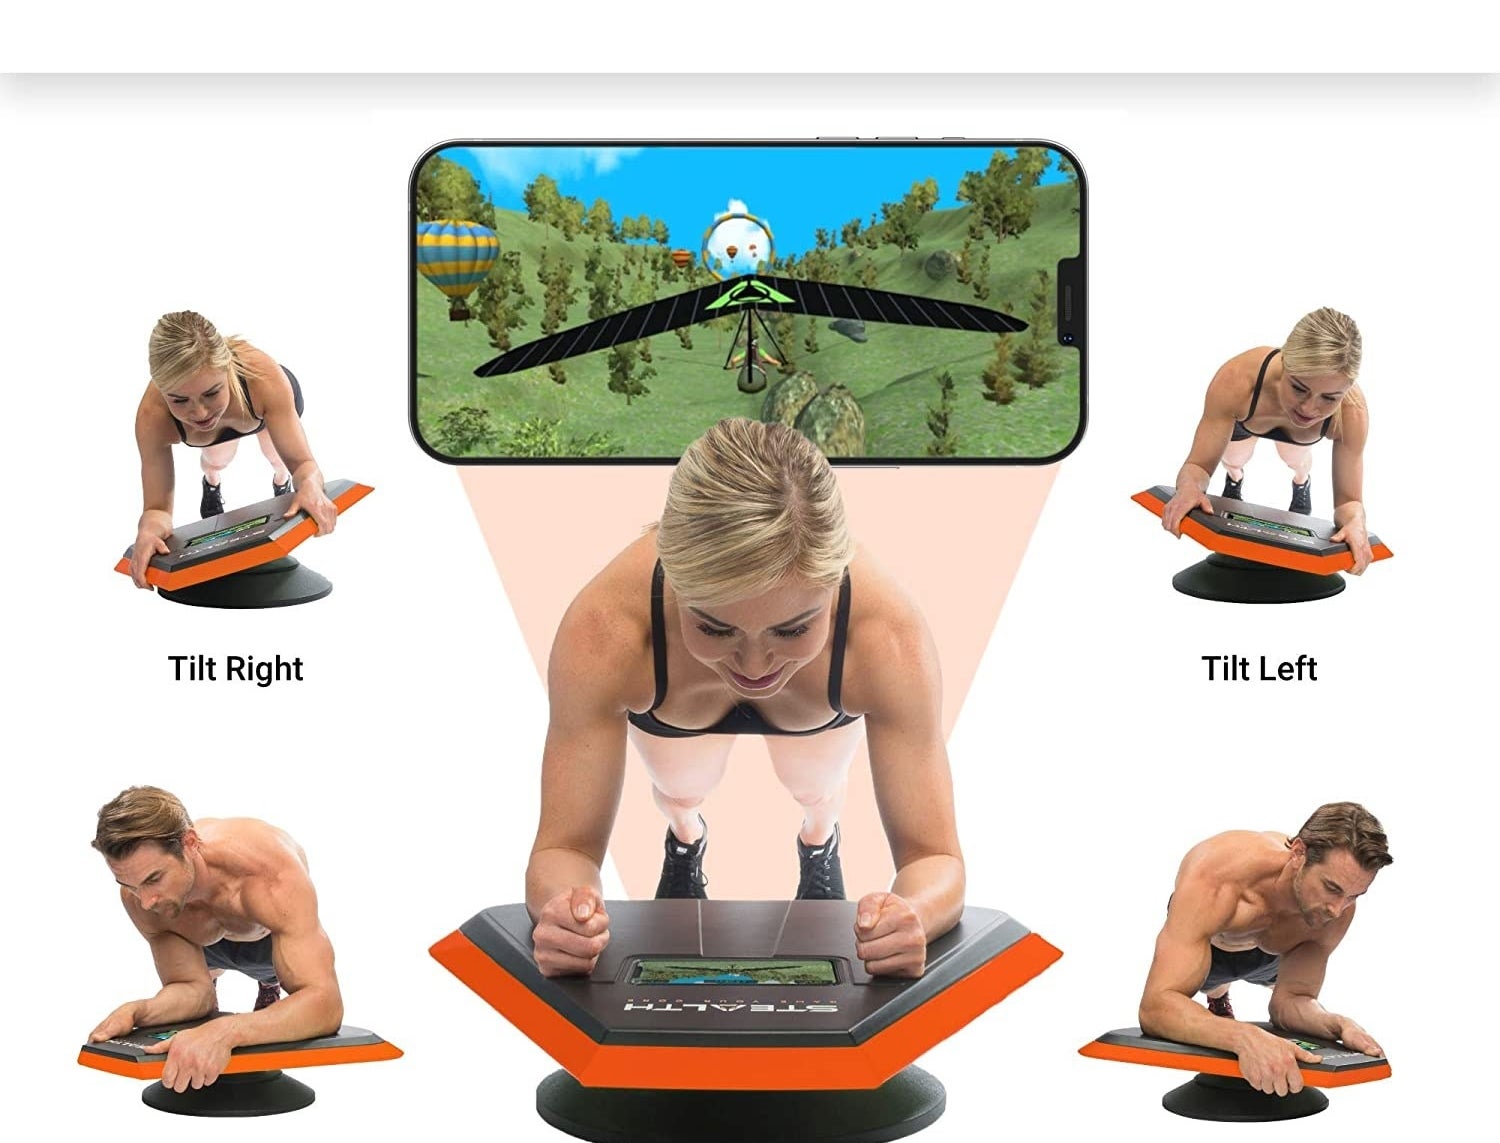 Models showing how you tilt and twist on the trainer following the game on a smartphone